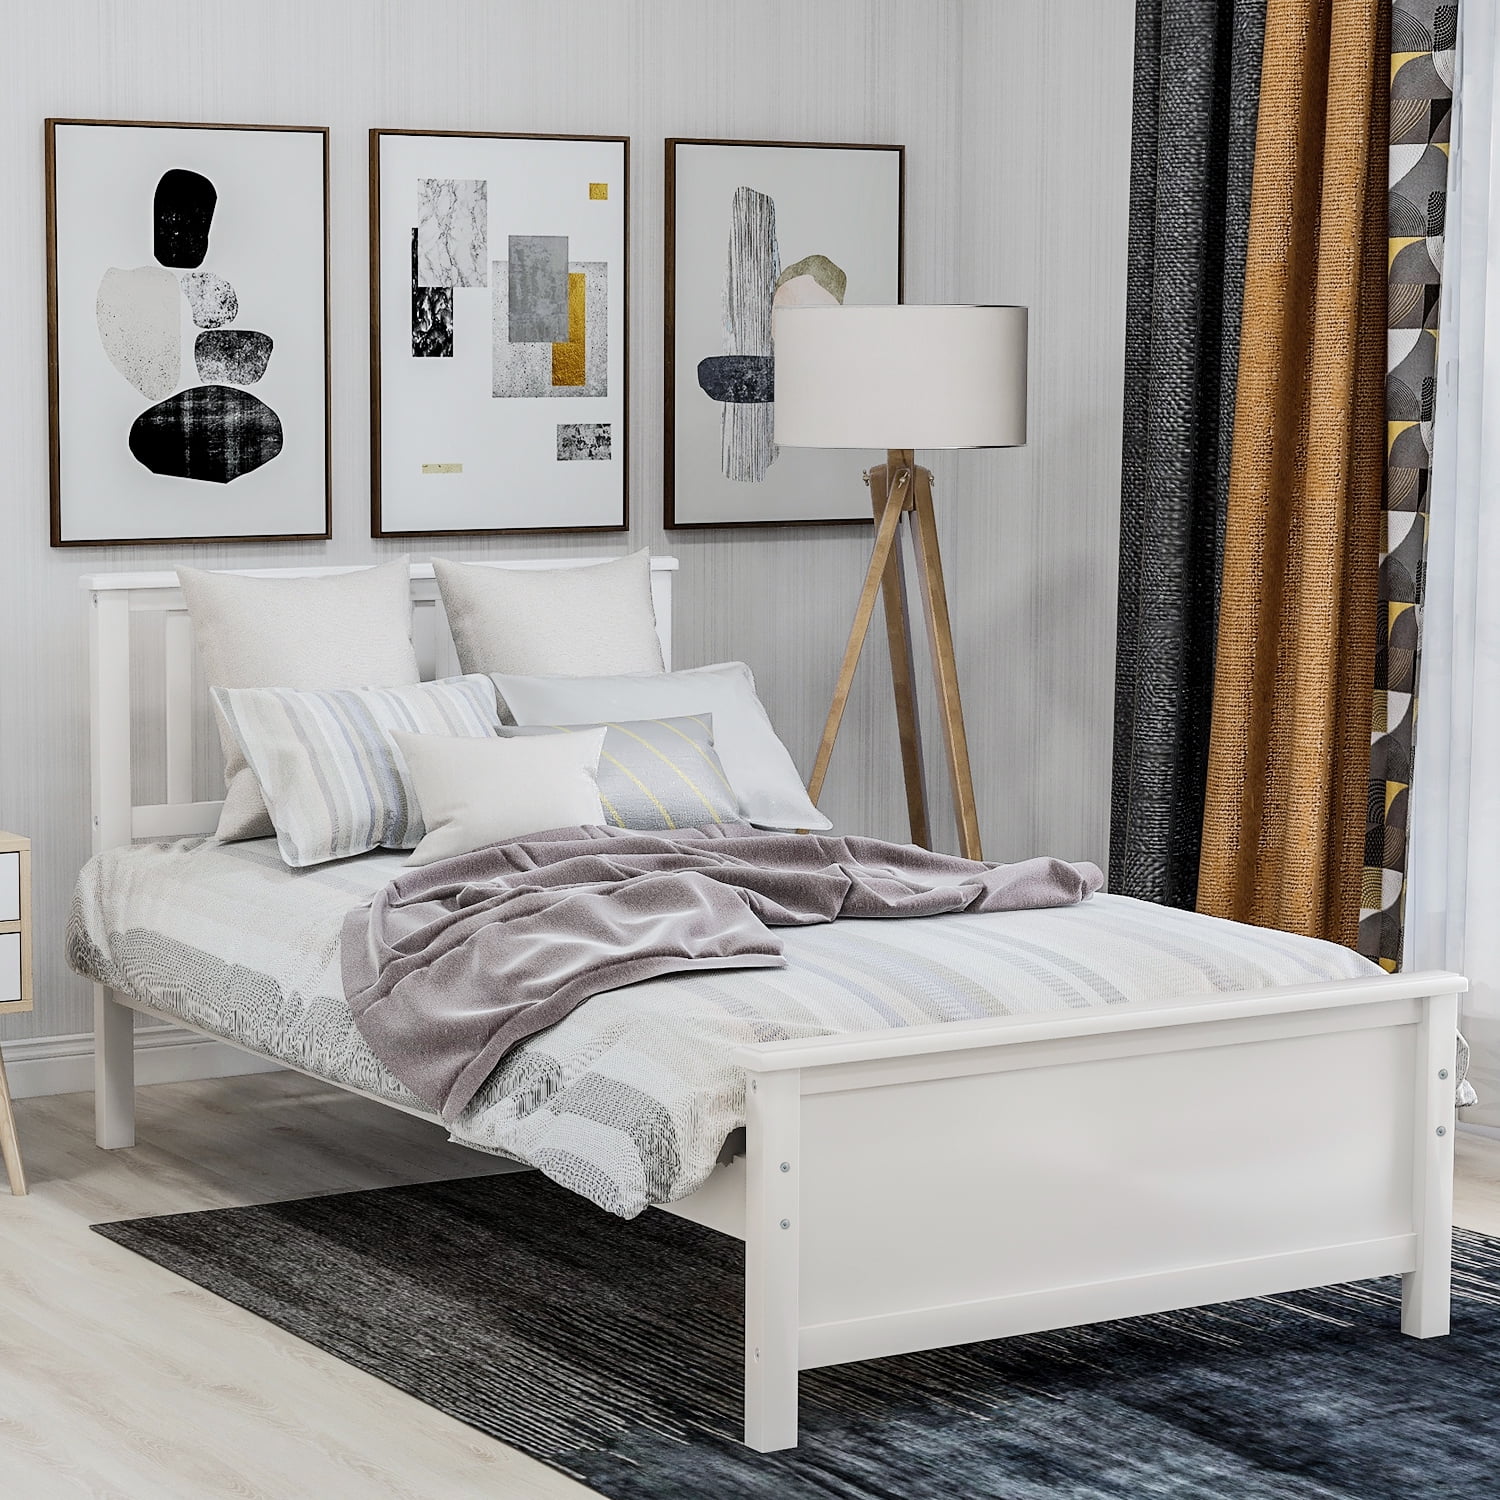 Twin Size Platform Bed with Headboard Bedroom Wooden Slatted Bed frame 